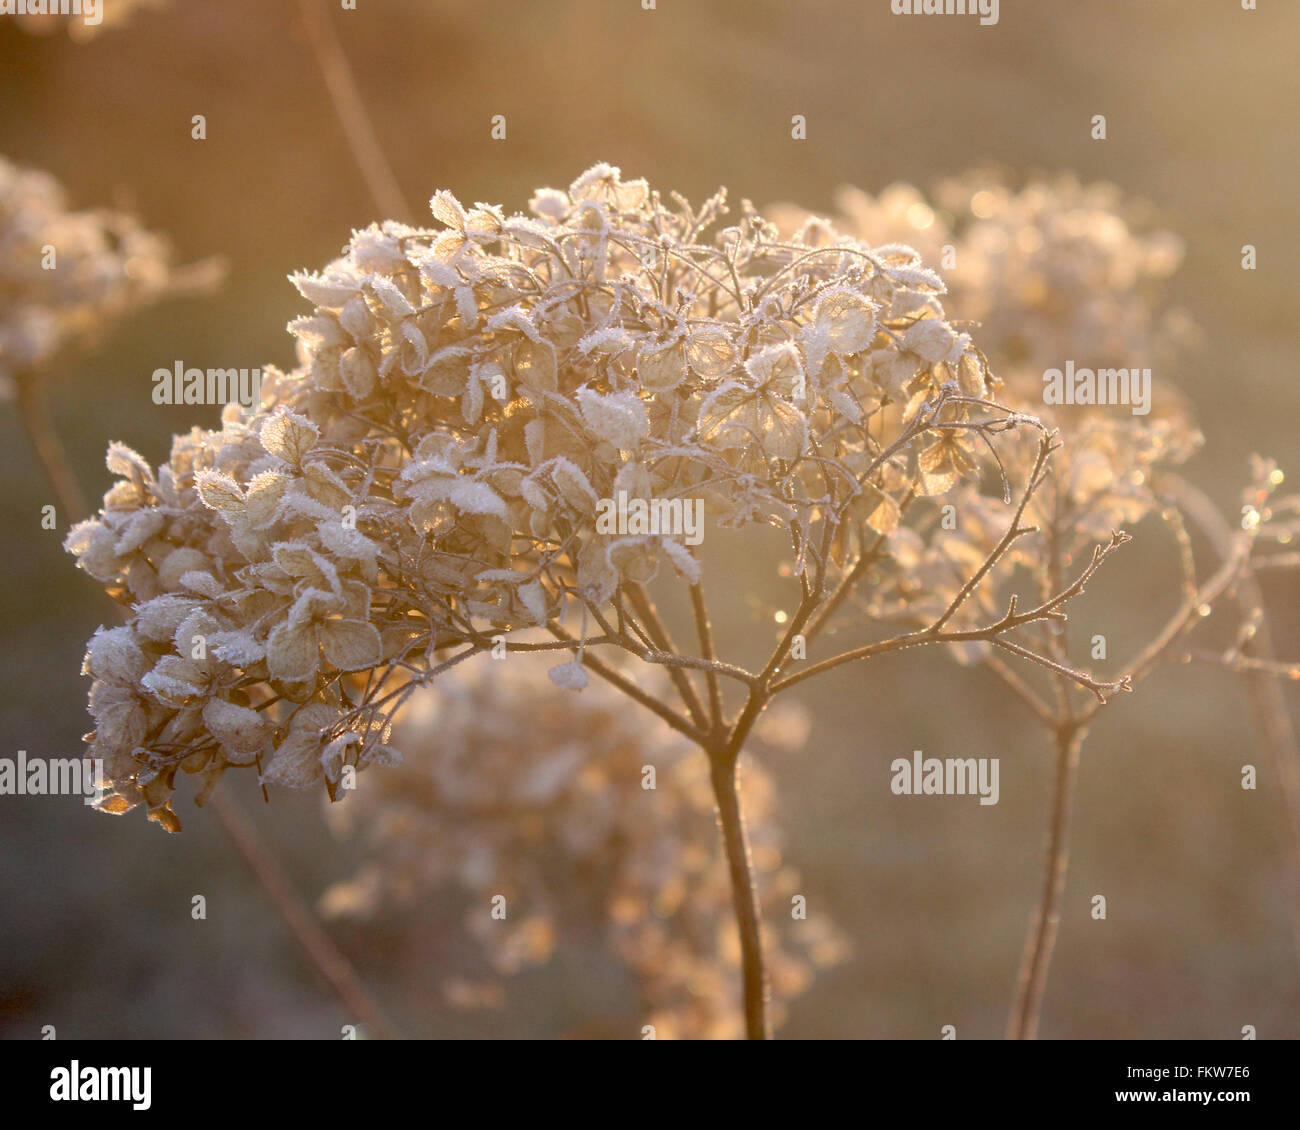 Romantic back lit dried flower head of Hydrangea arborescens Annabelle on a cold misty winters morning. Stock Photo